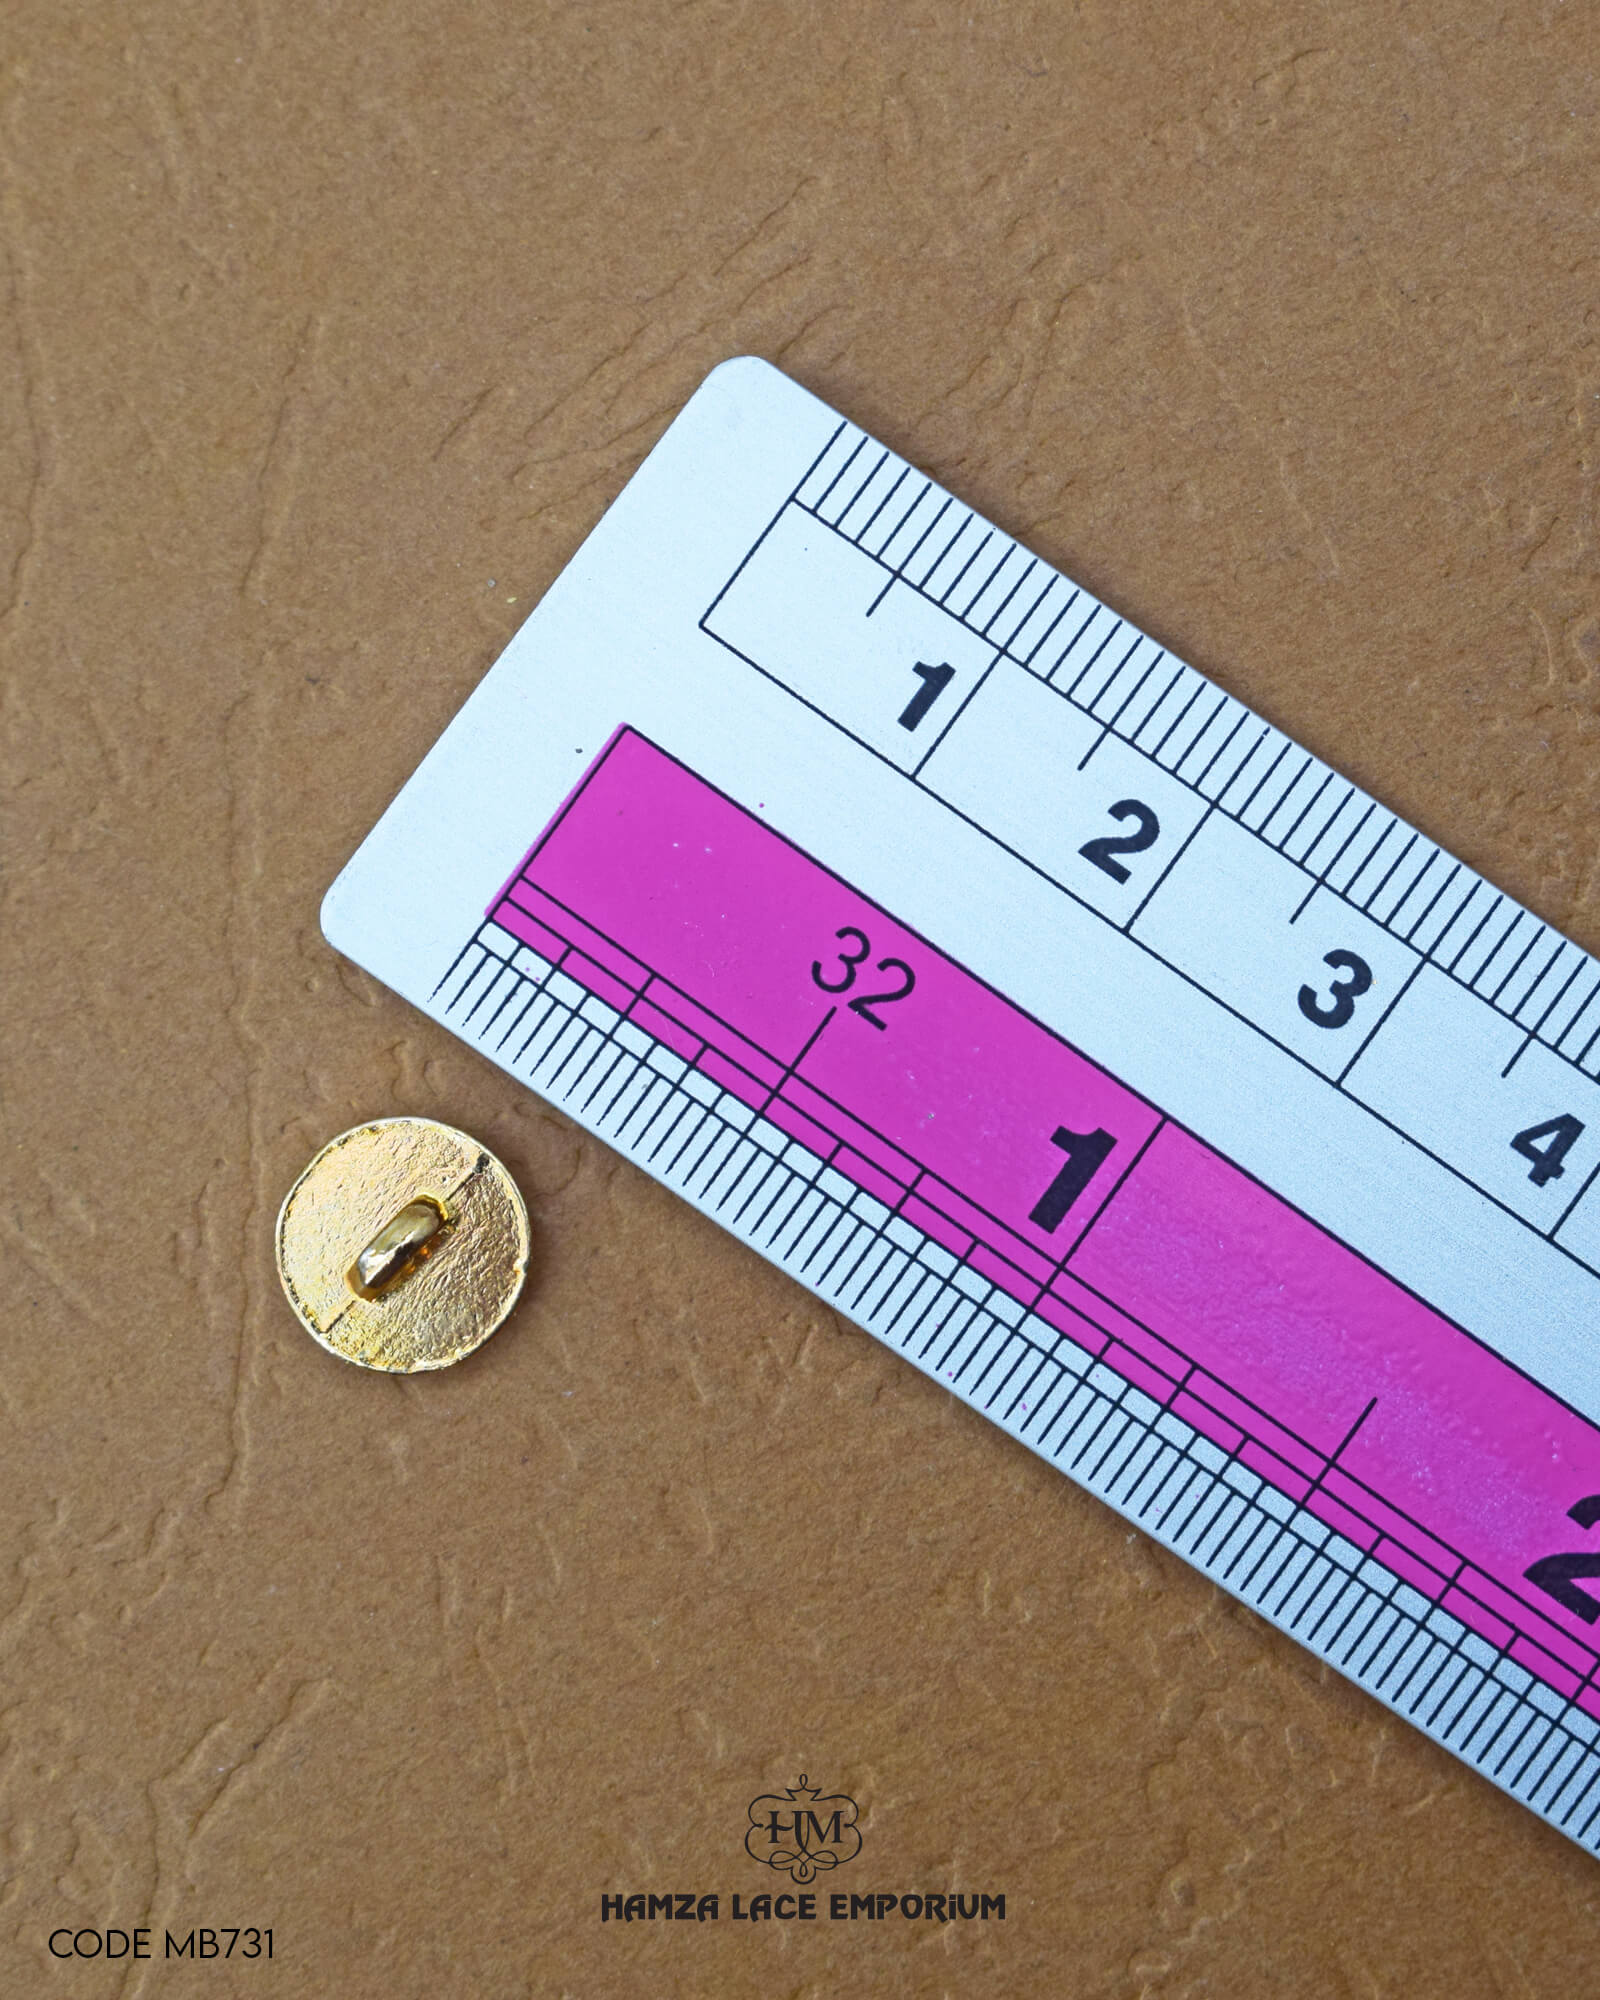 The size of the 'Golden Metal Button MB731' is measured by using a ruler